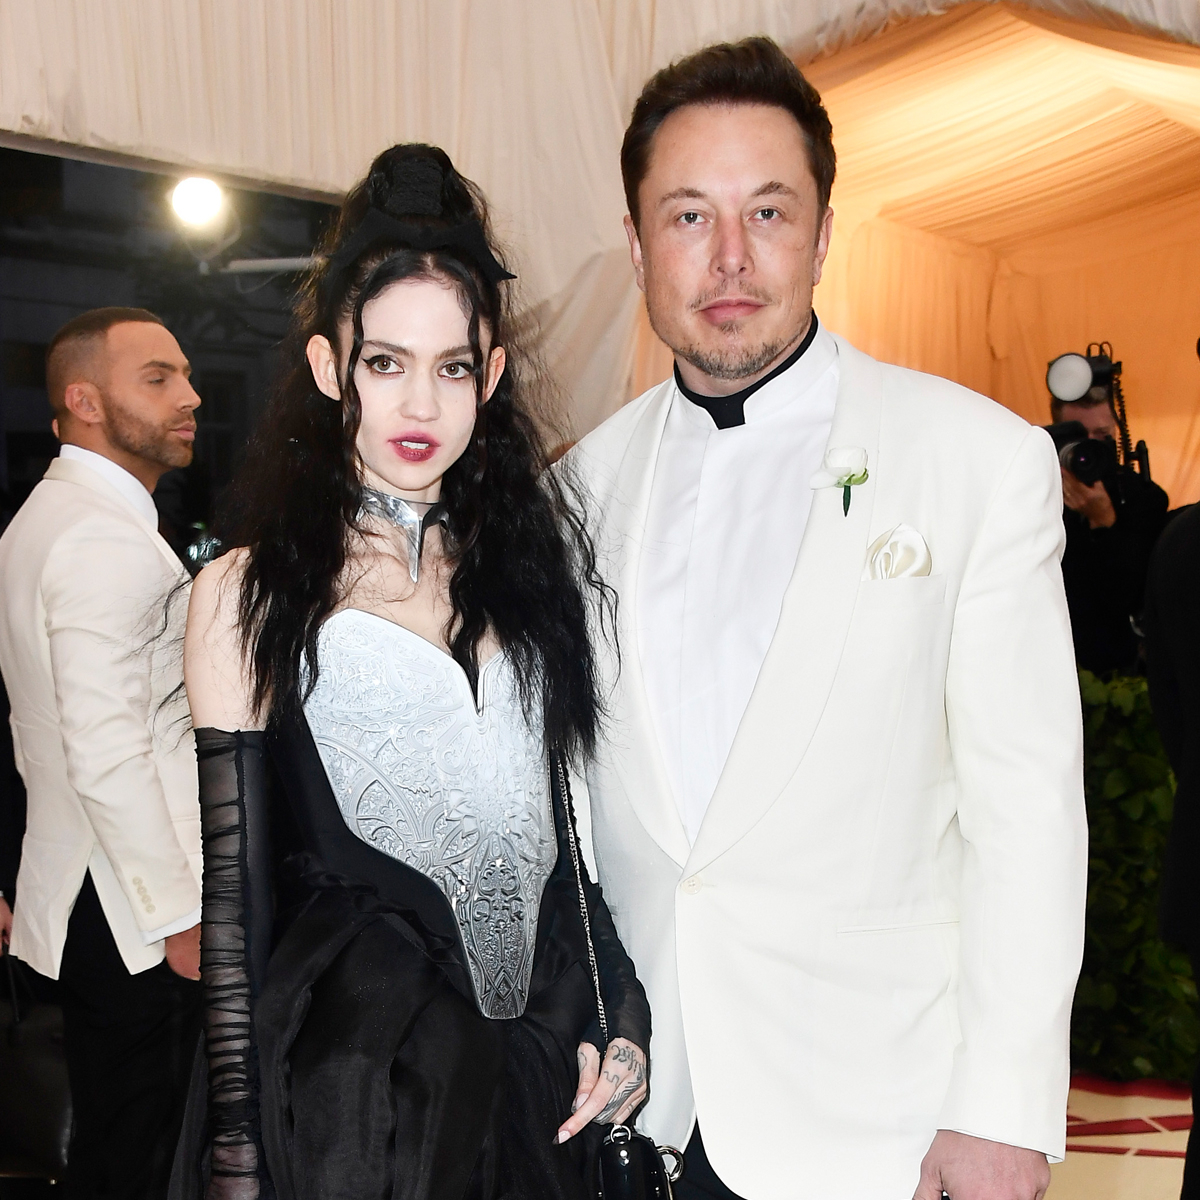 Elon Musk Shares New Family Photo of His and Grimes’ Son X Æ A-Xii - E! Online